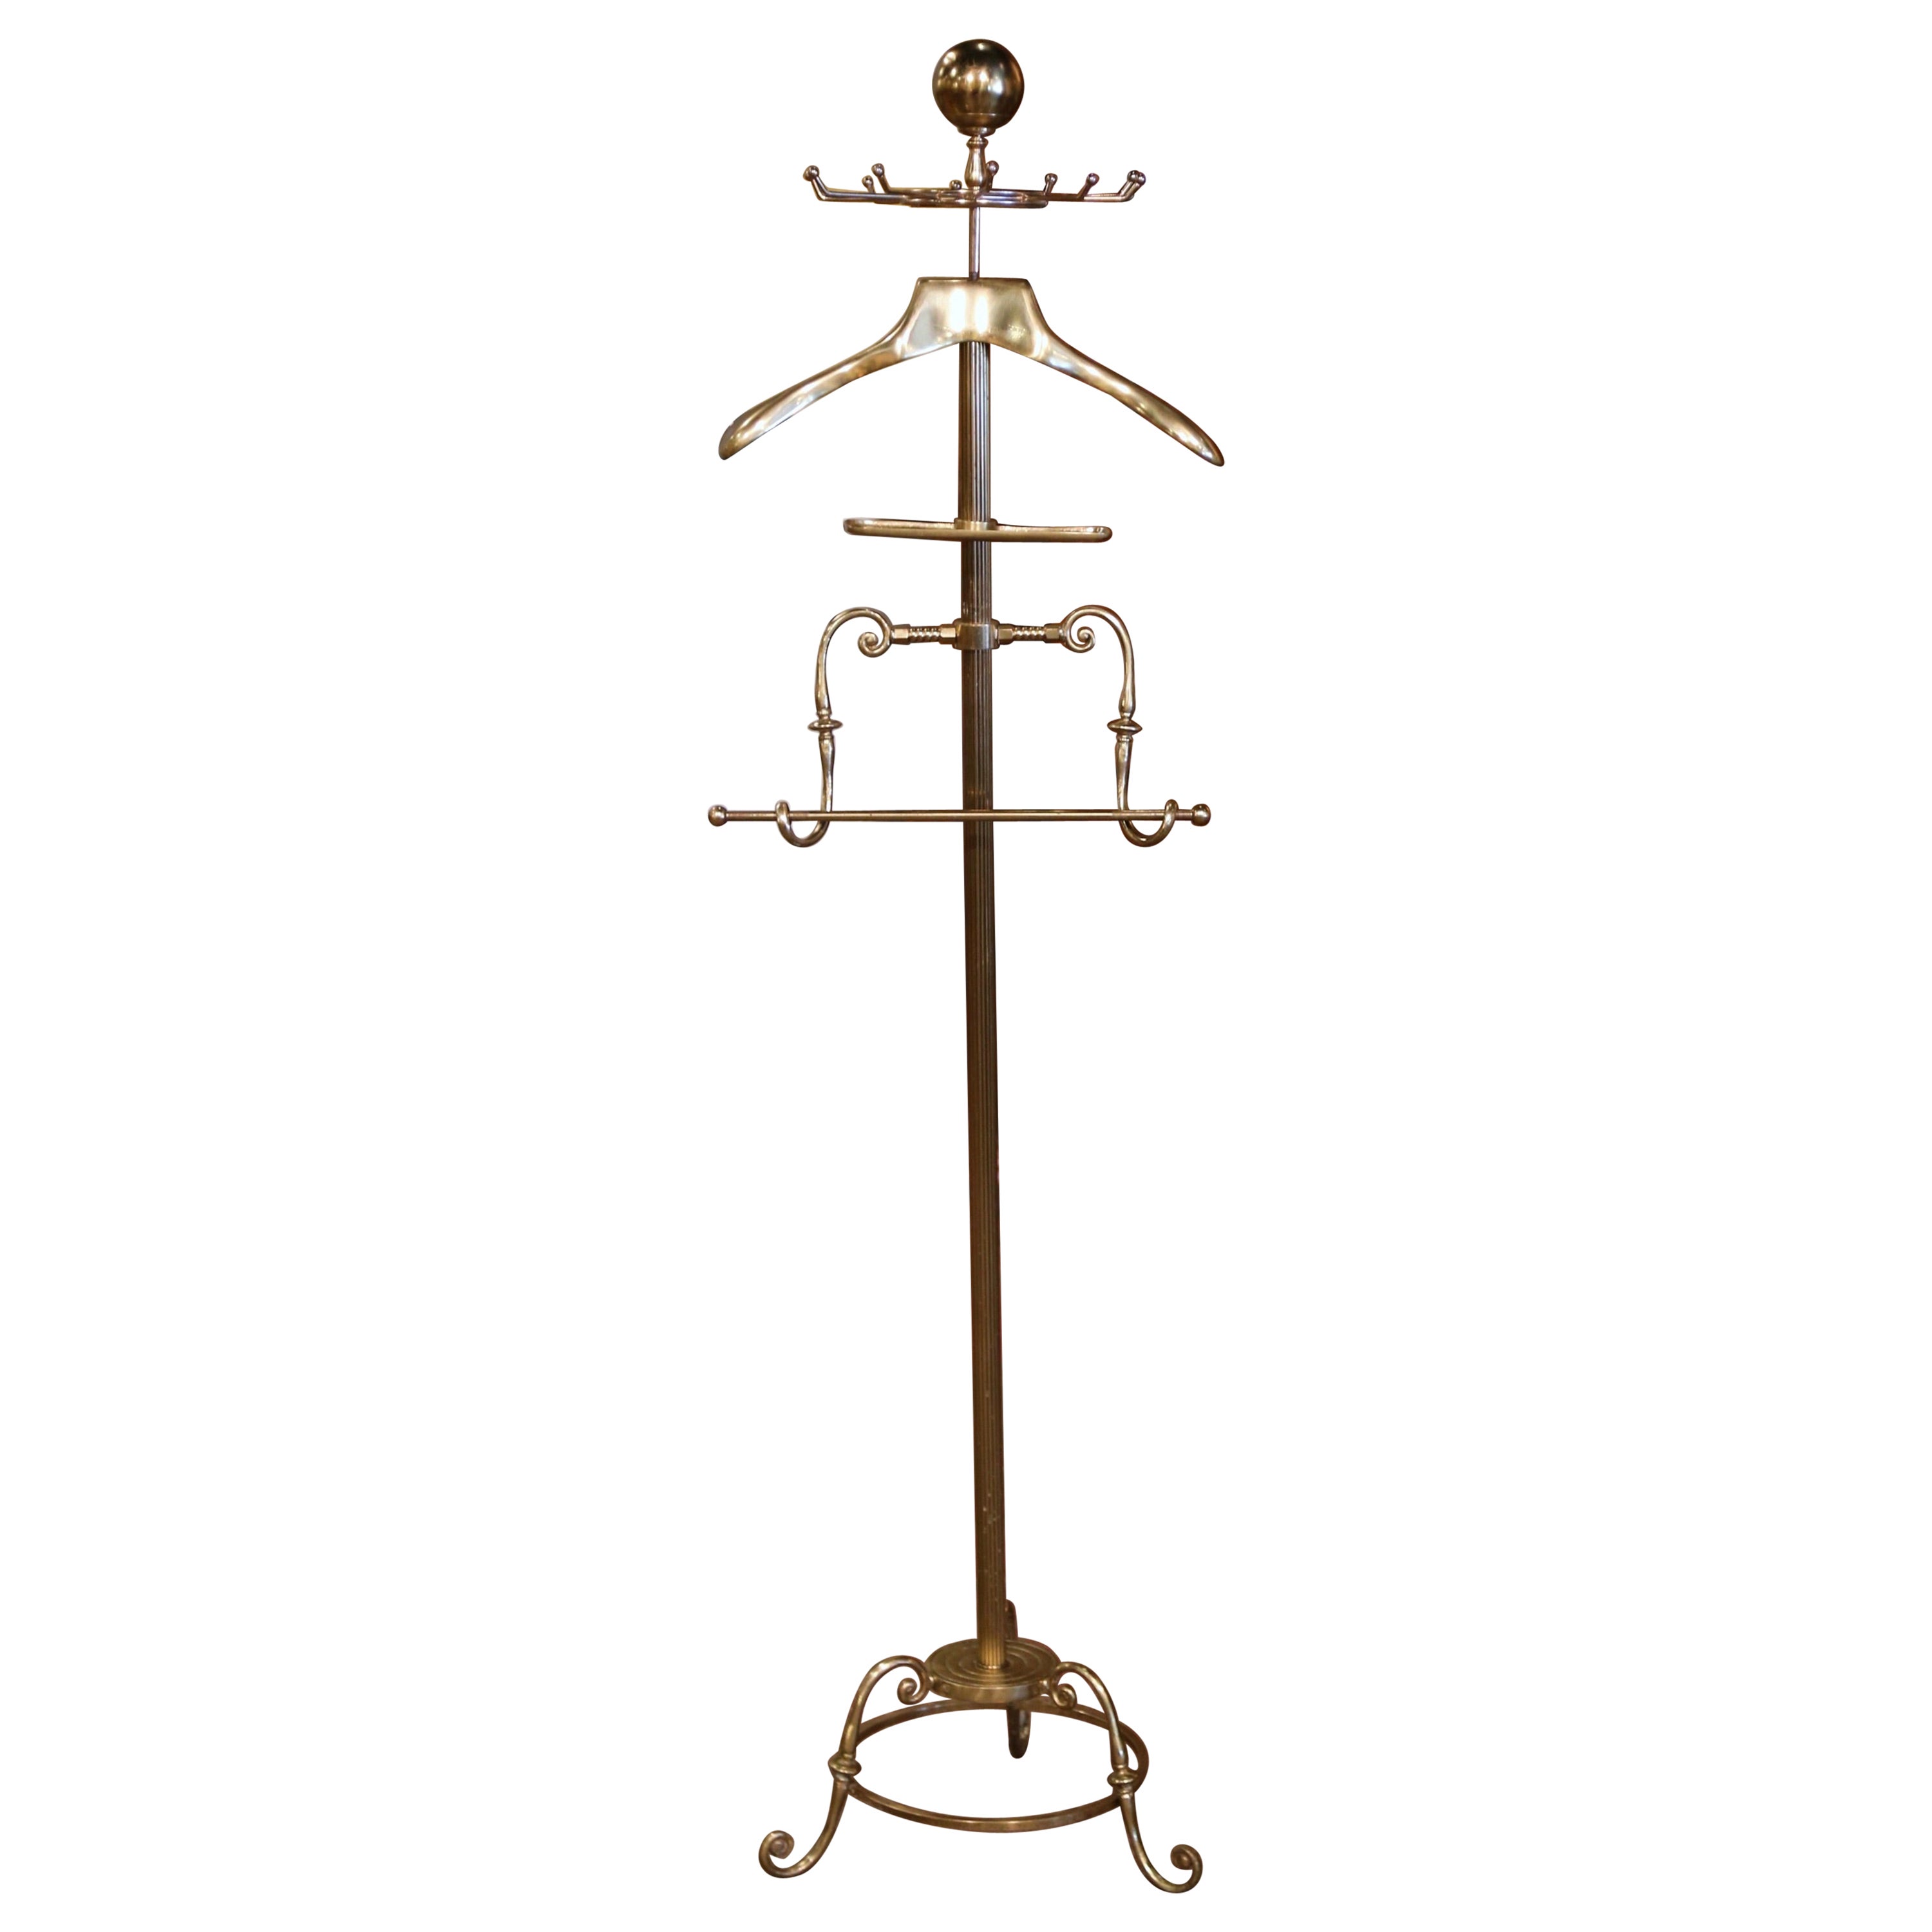 Early 20th Century French Gilt Brass Jacket Hanger Bathroom Coat Stand For Sale